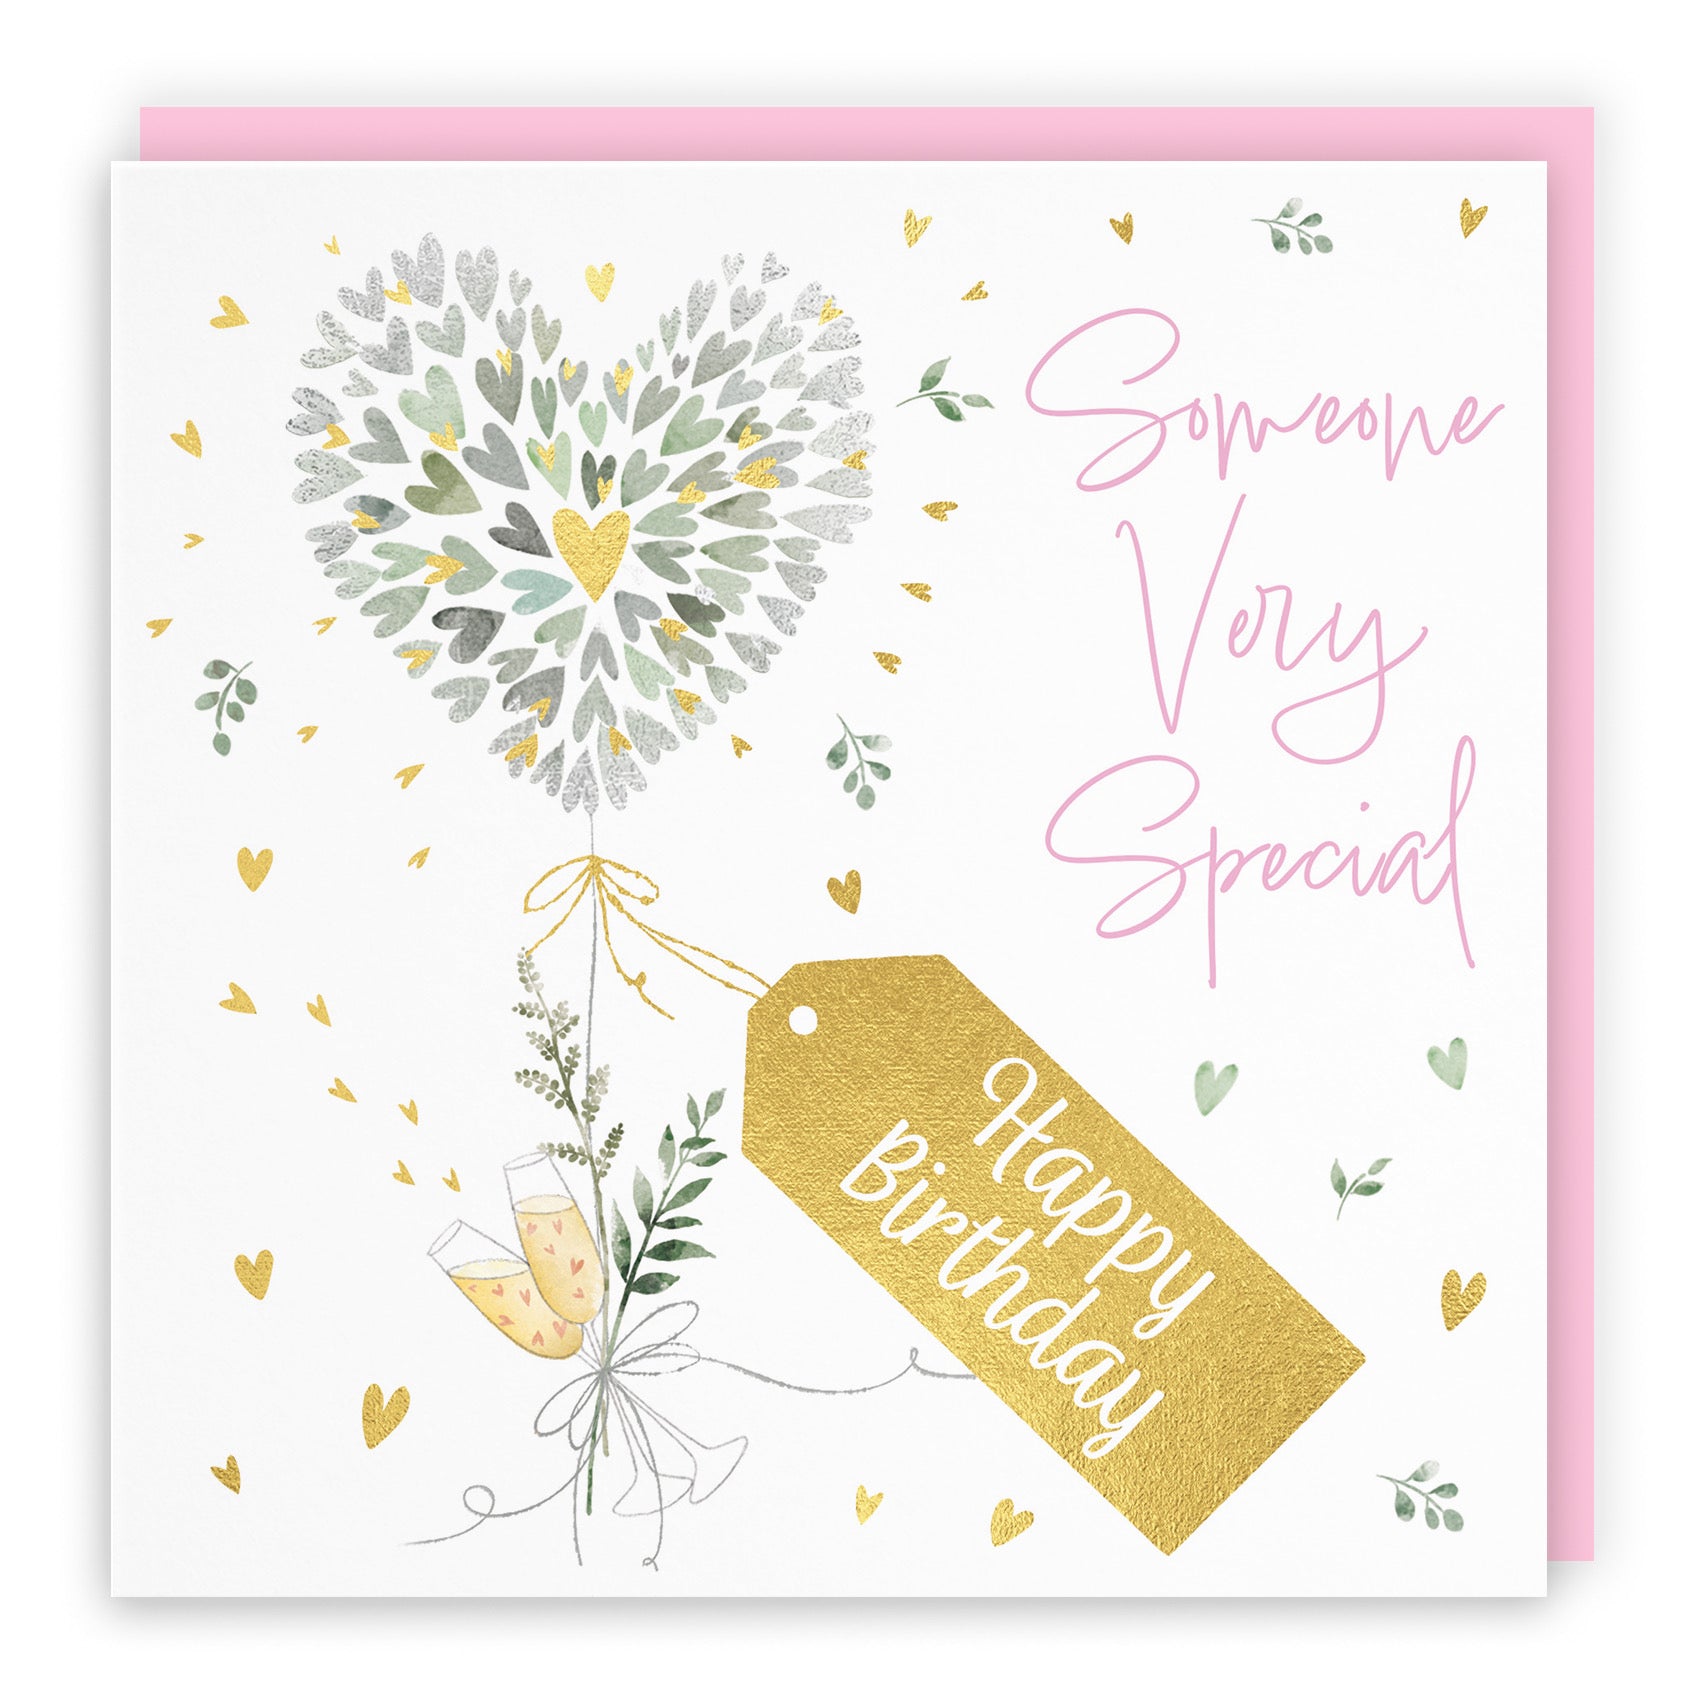 Someone Very Special Contemporary Hearts Birthday Card Gold Foil Milo's Gallery - Default Title (B0CY9VP4JY)